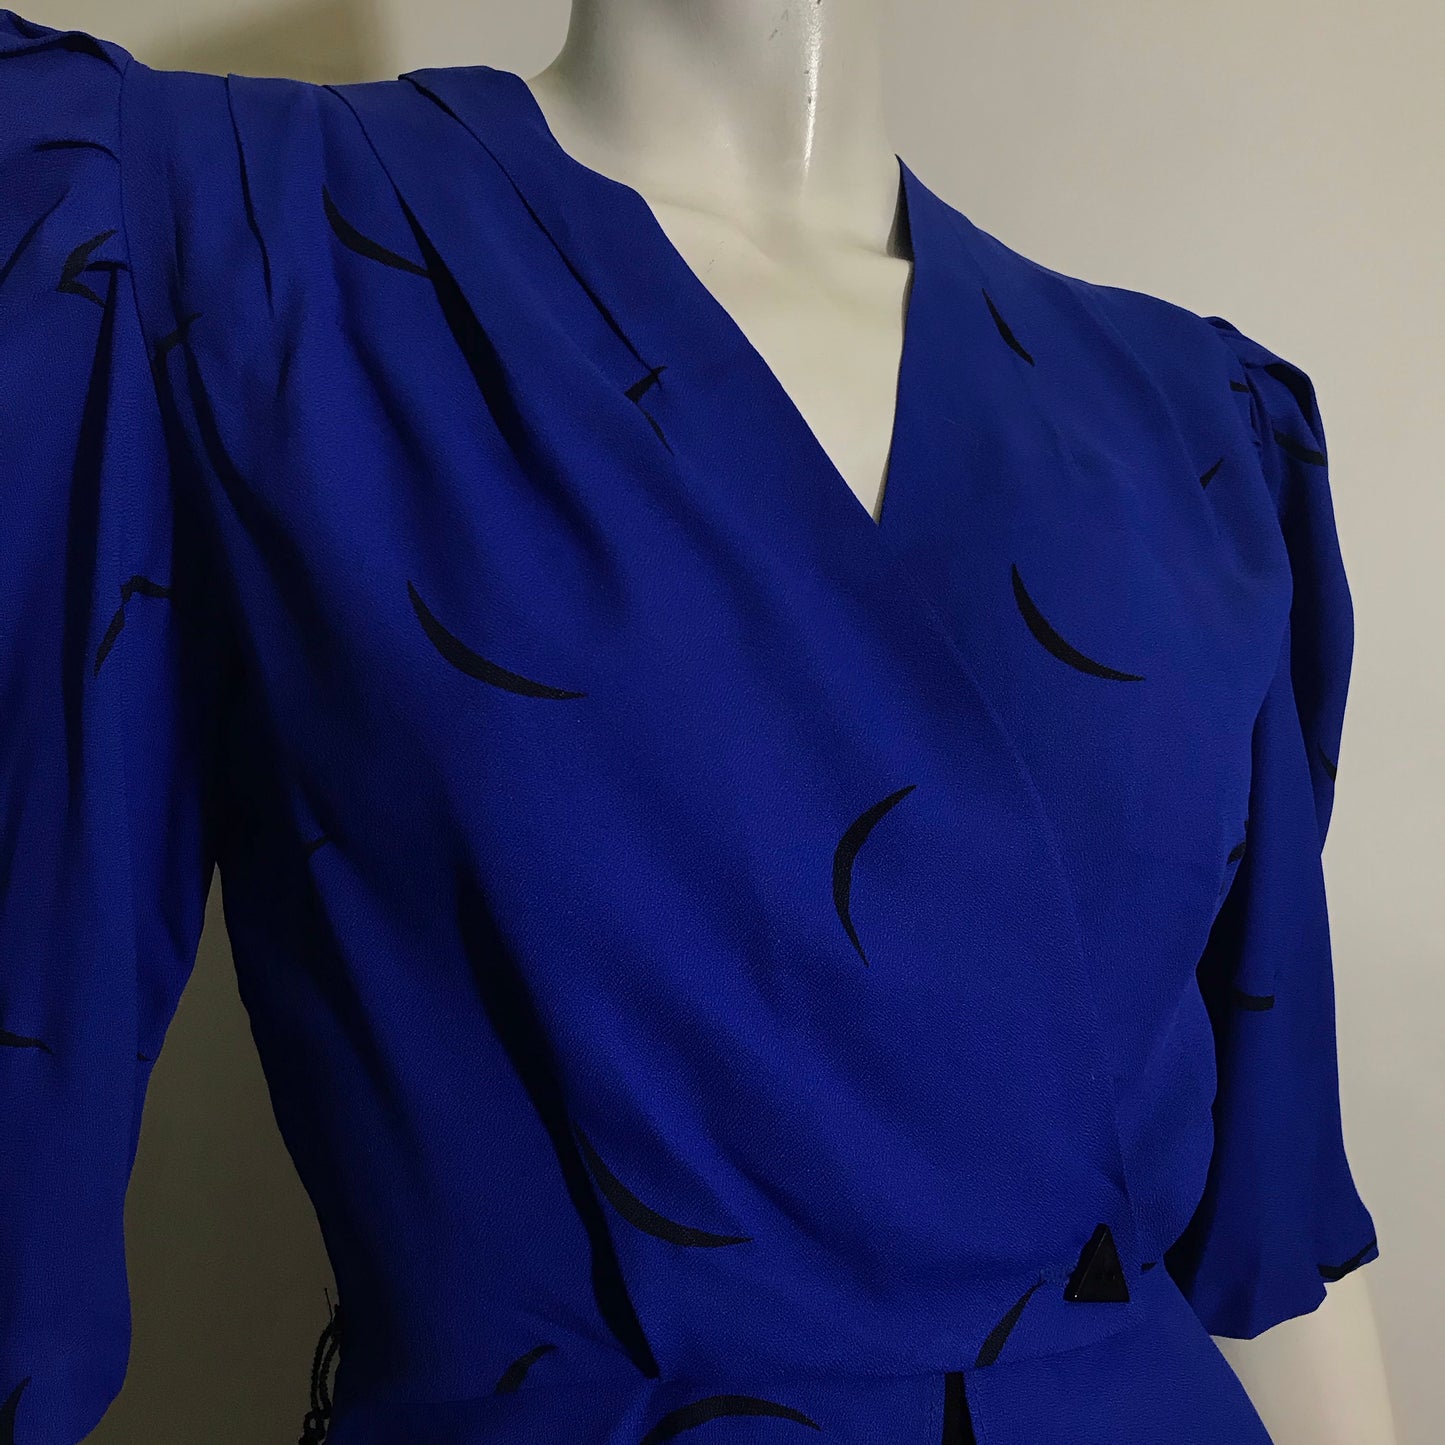 Blade Runner Chic Black and Blue Suit Dress with Peplum circa 1980s